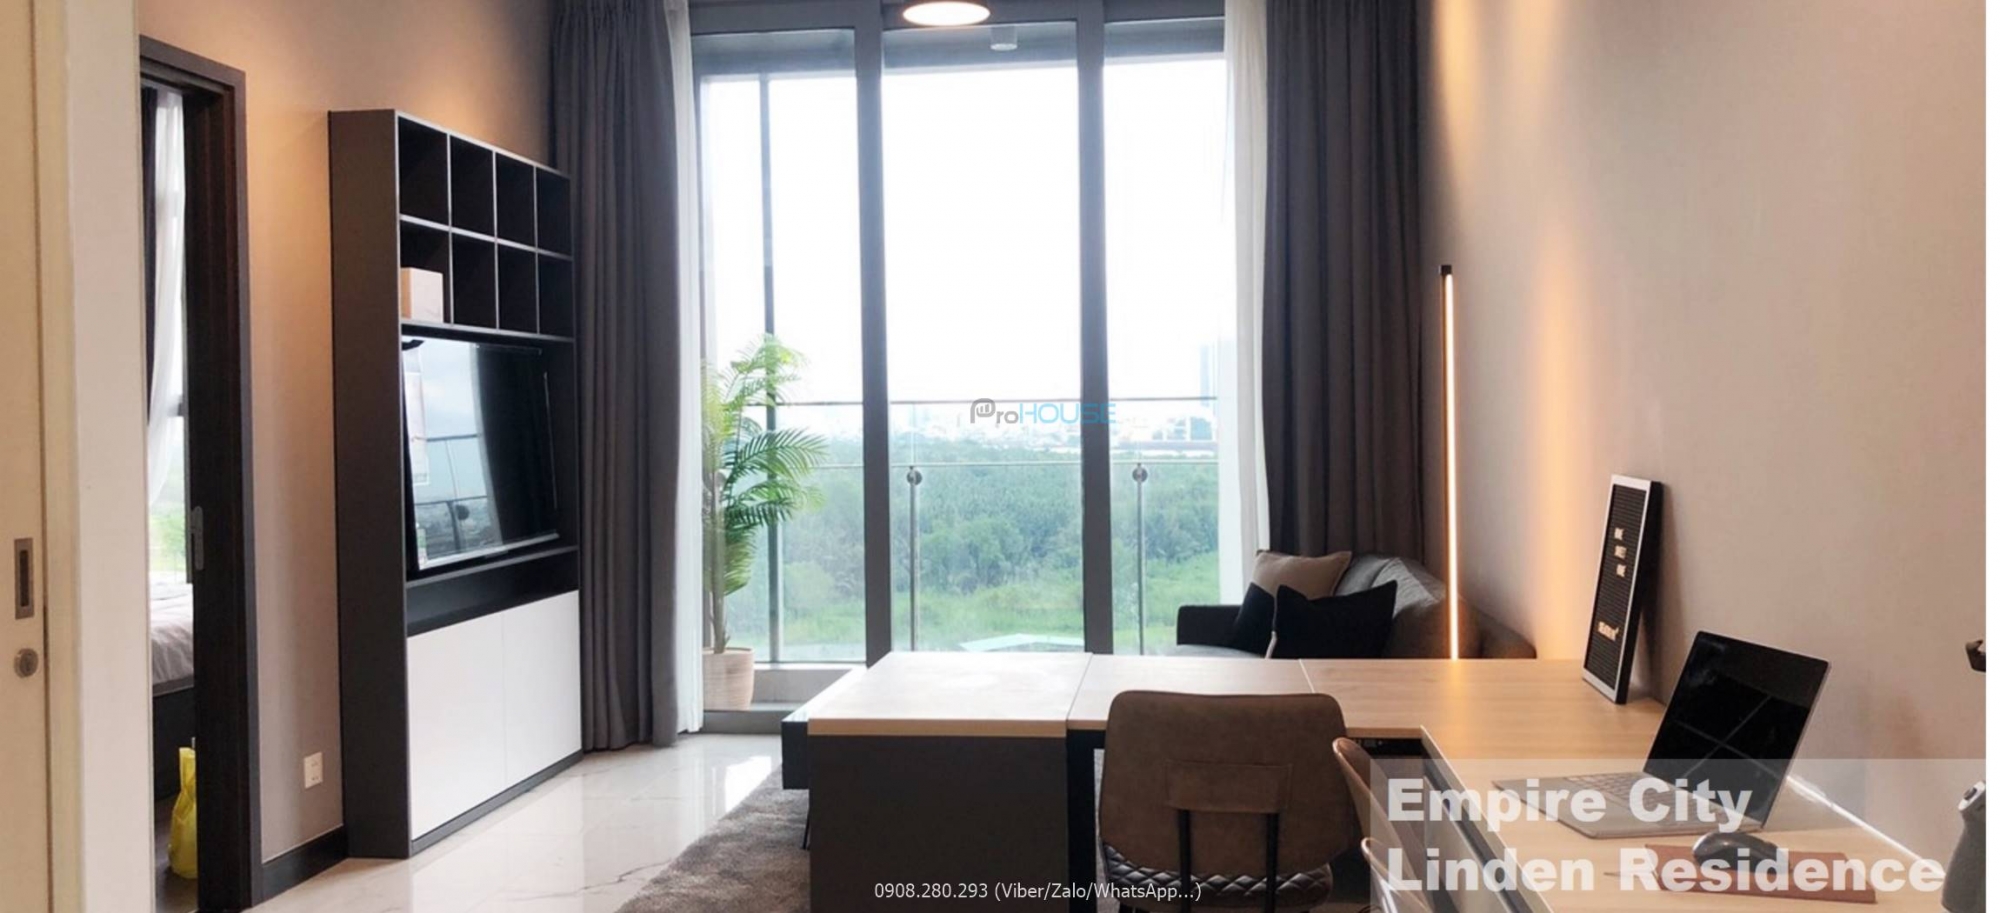 LOW RENTAL BUT BEAUTIFUL APARTMENT IN EMPIRE CITY